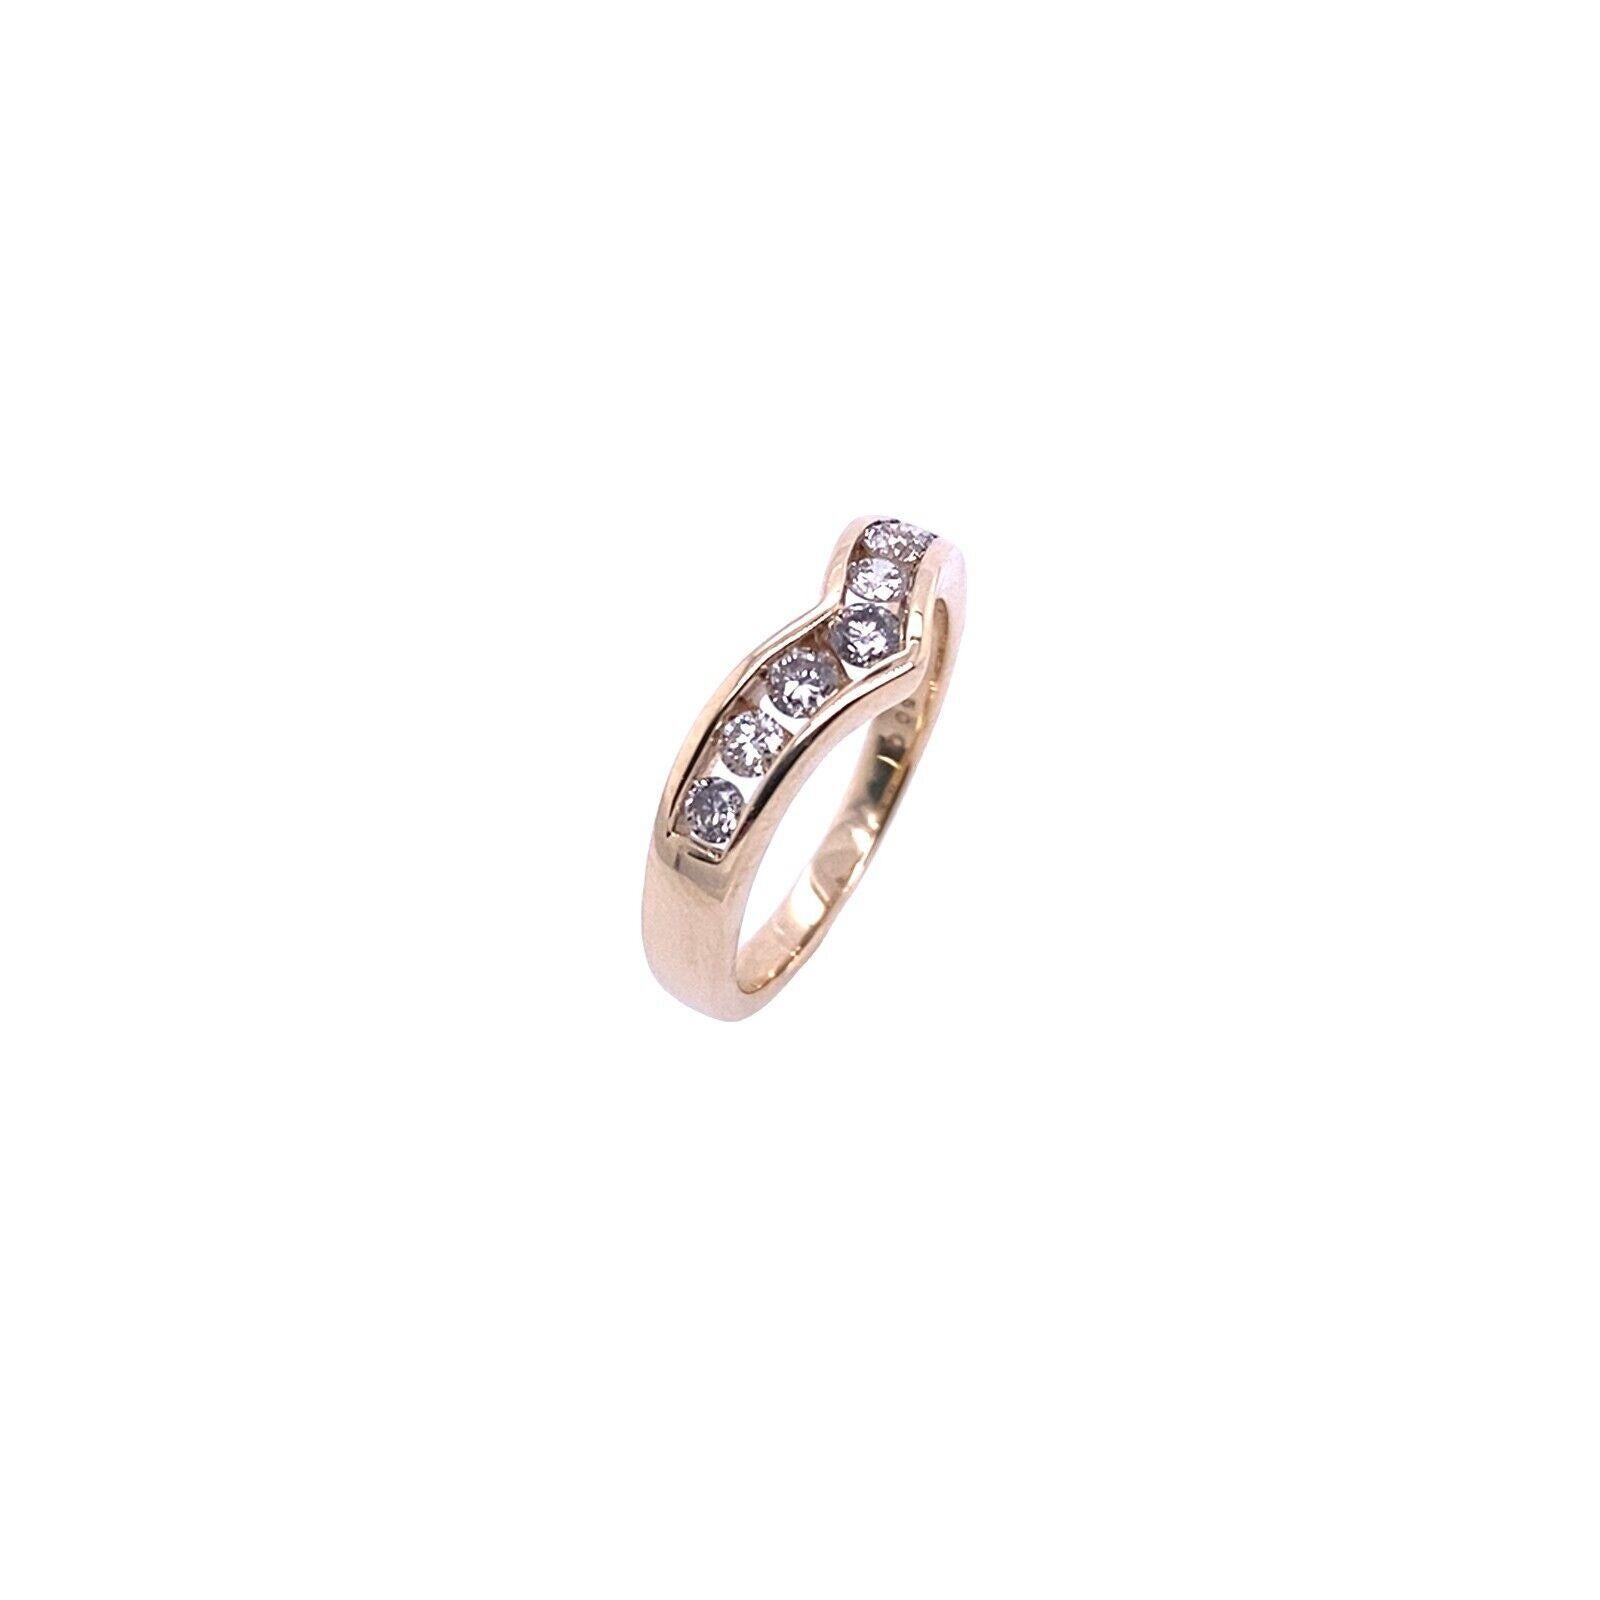 This classic channel set diamond wishbone ring is a unique twist on the traditional style. The diamond wishbone is set in 9ct yellow gold with a total diamond weight of 0.50ct.

Additional Information: 
Total Diamond Weight: 0.50ct
Diamond Colour: